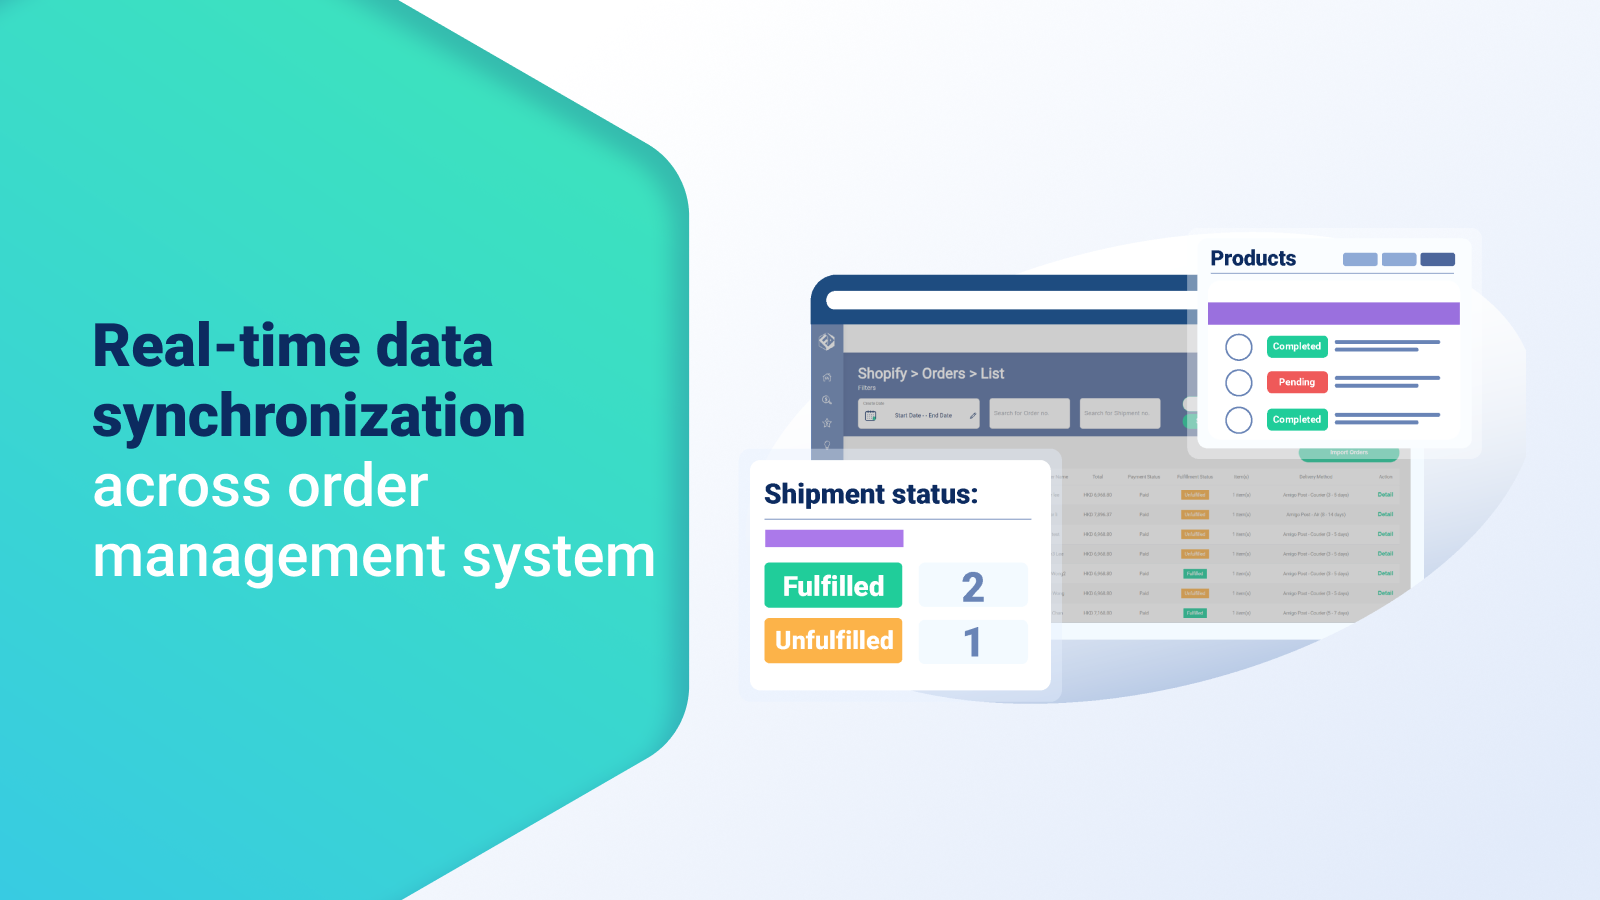 Real-time data synchronization across order management system